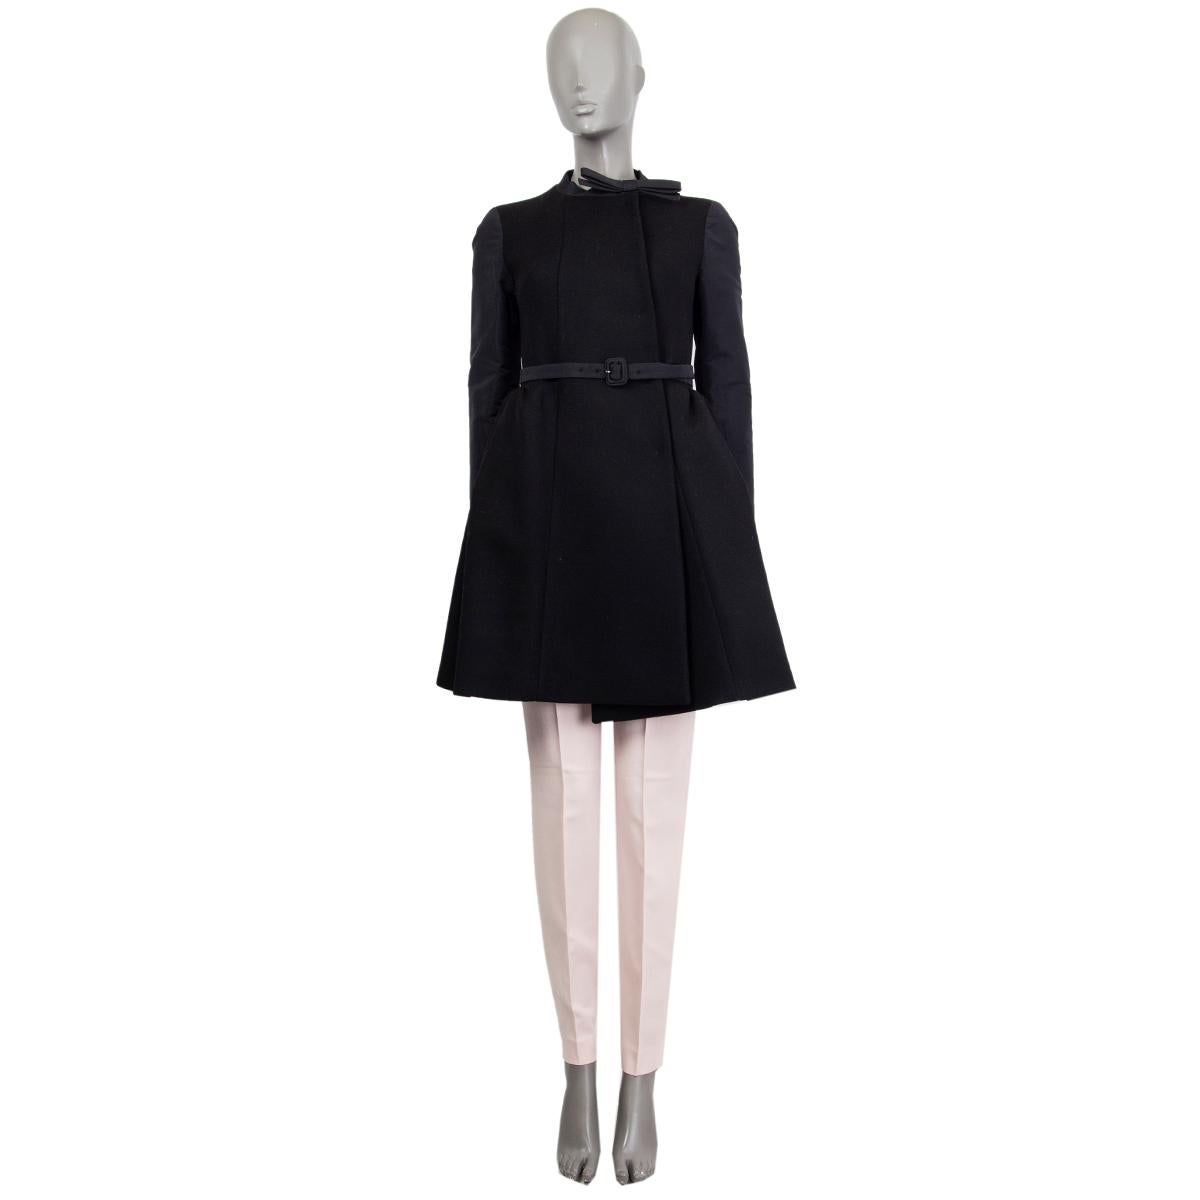 100% authentic Miu Miu double-breasted coat in black virgine wool (100%) with a belted waist, round neckline detailed with a ribbon, long sleeves in polyester (57%) acetate (43%) and a pleated botton. Lined in black viscose (100%). Closes with